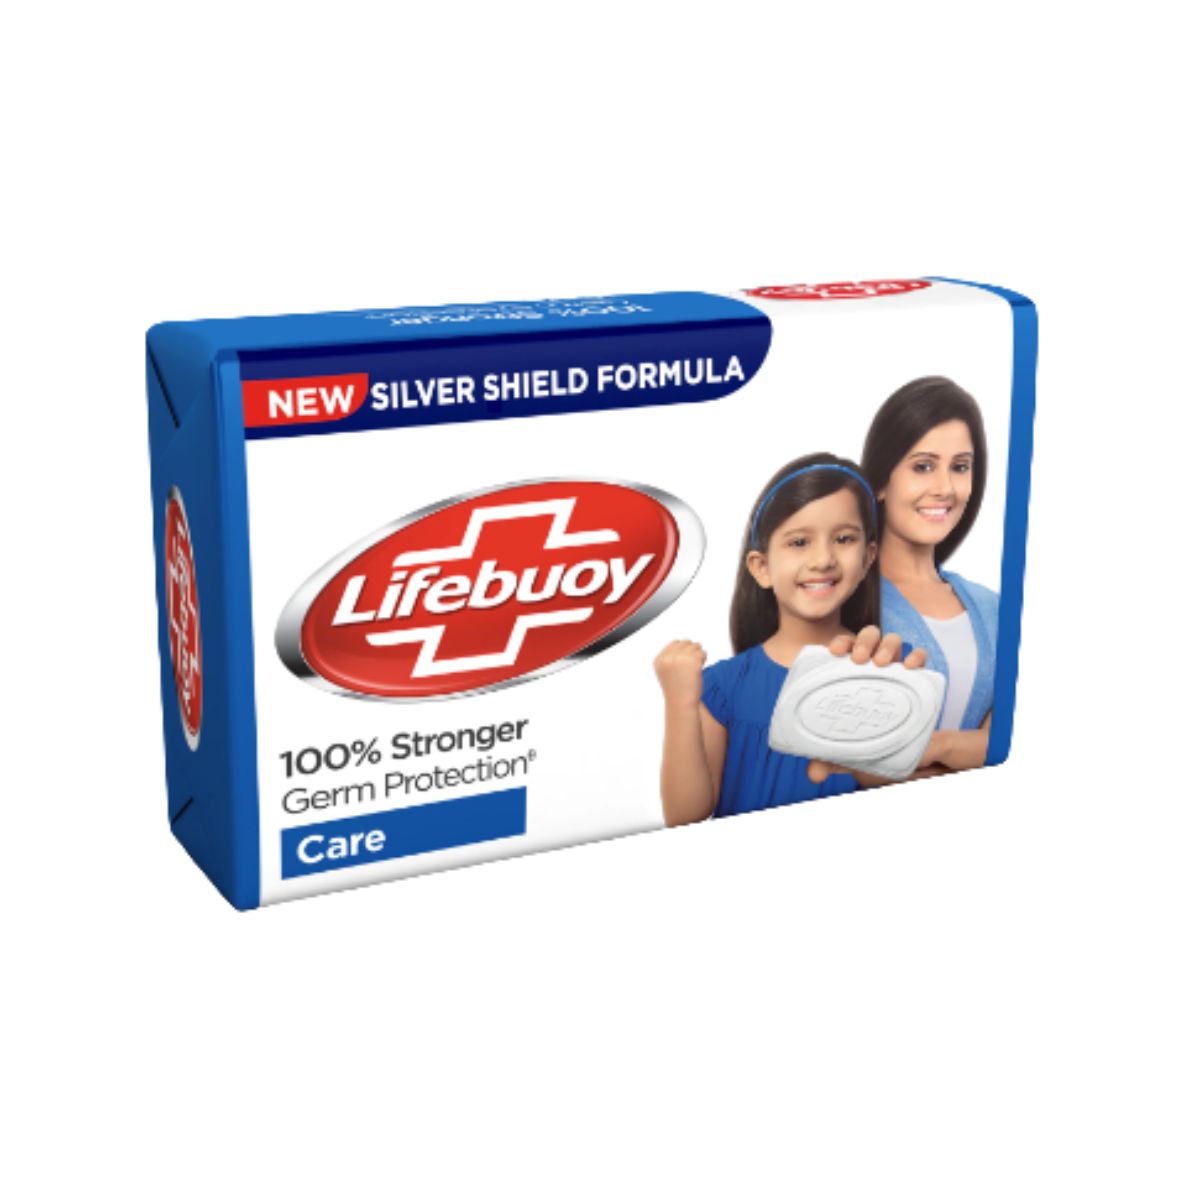 Lifebuoy Soap 100% Stronger Germ Protection Care - 100g